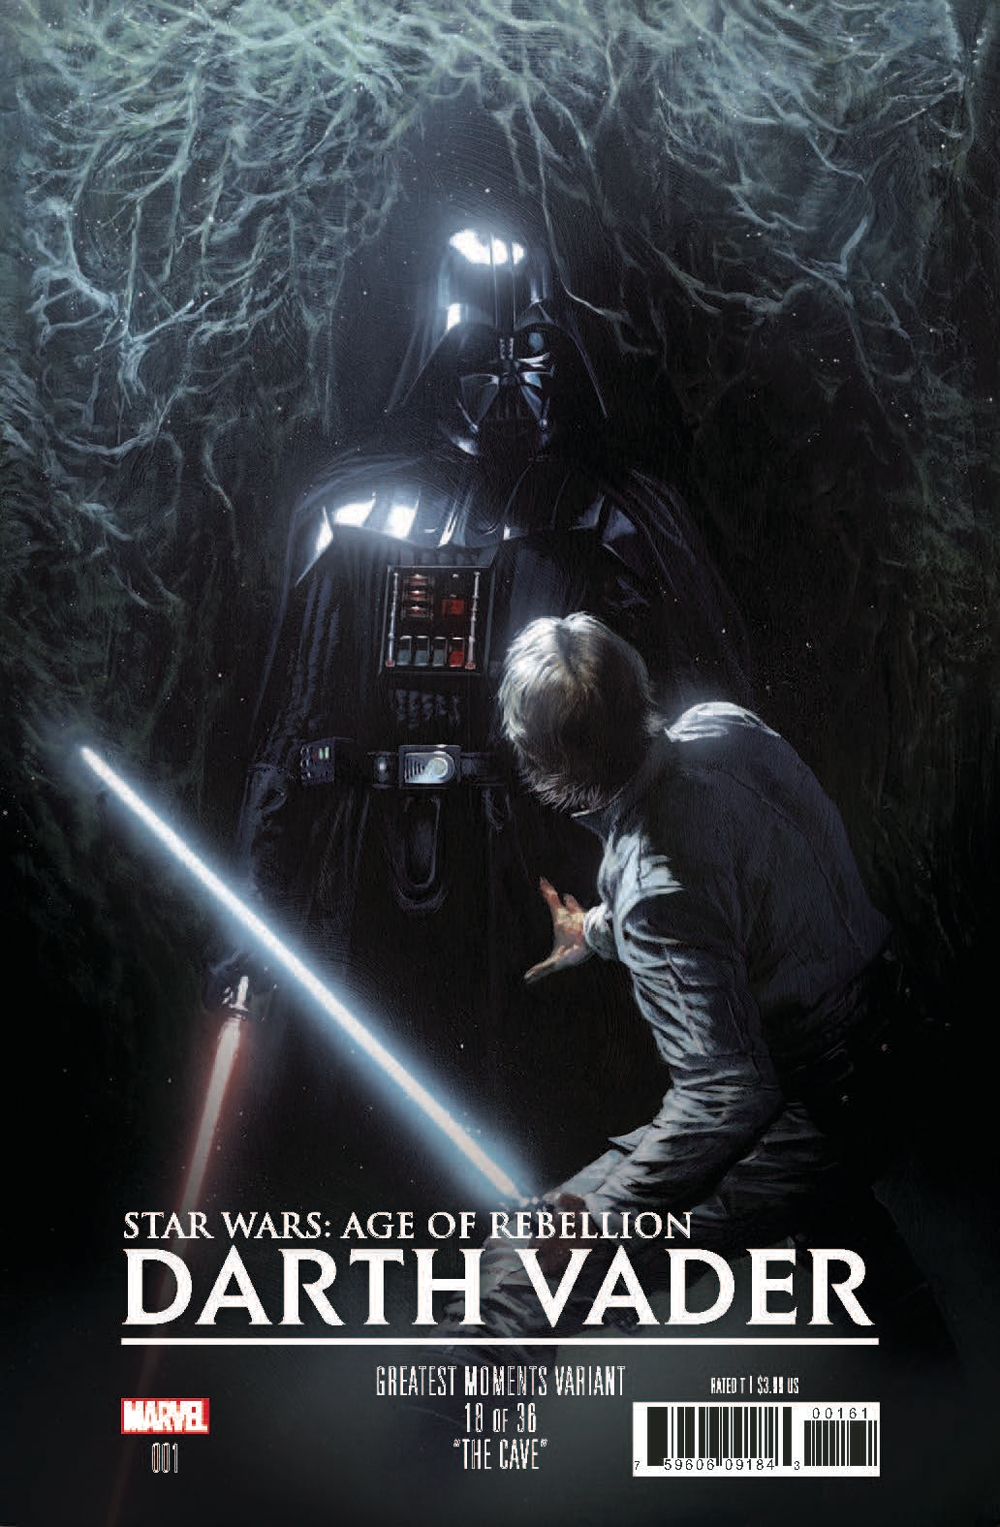 Age of Rebellion: Darth Vader #1 (Gabriele Dell'Otto Greatest Moments Variant Cover 18 of 36) (26.06.2019)